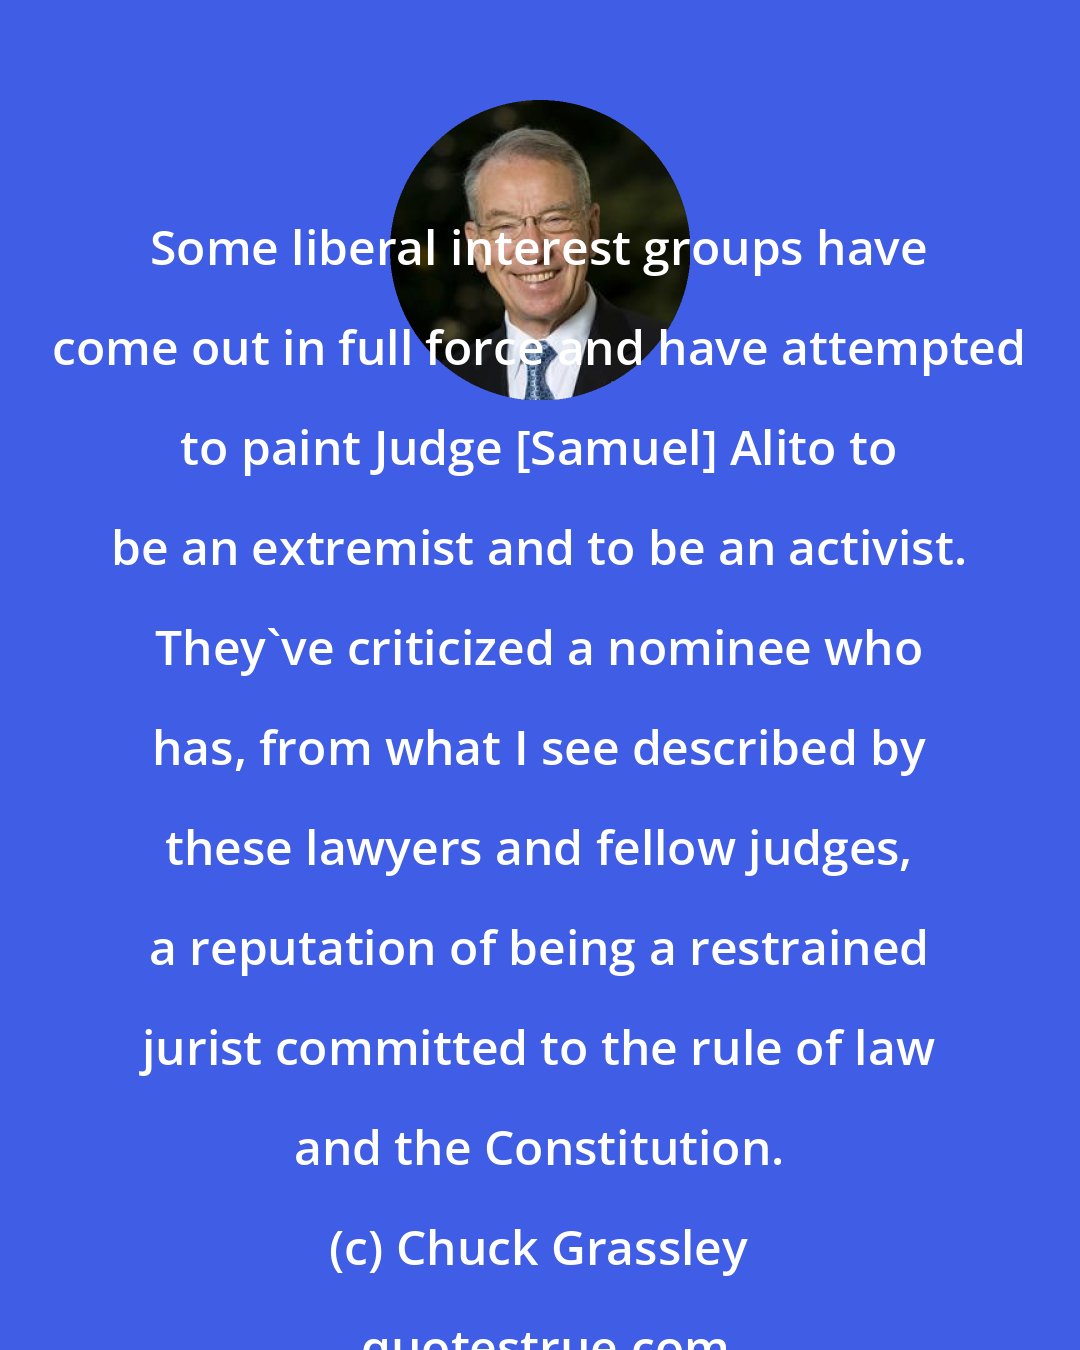 Chuck Grassley: Some liberal interest groups have come out in full force and have attempted to paint Judge [Samuel] Alito to be an extremist and to be an activist. They've criticized a nominee who has, from what I see described by these lawyers and fellow judges, a reputation of being a restrained jurist committed to the rule of law and the Constitution.